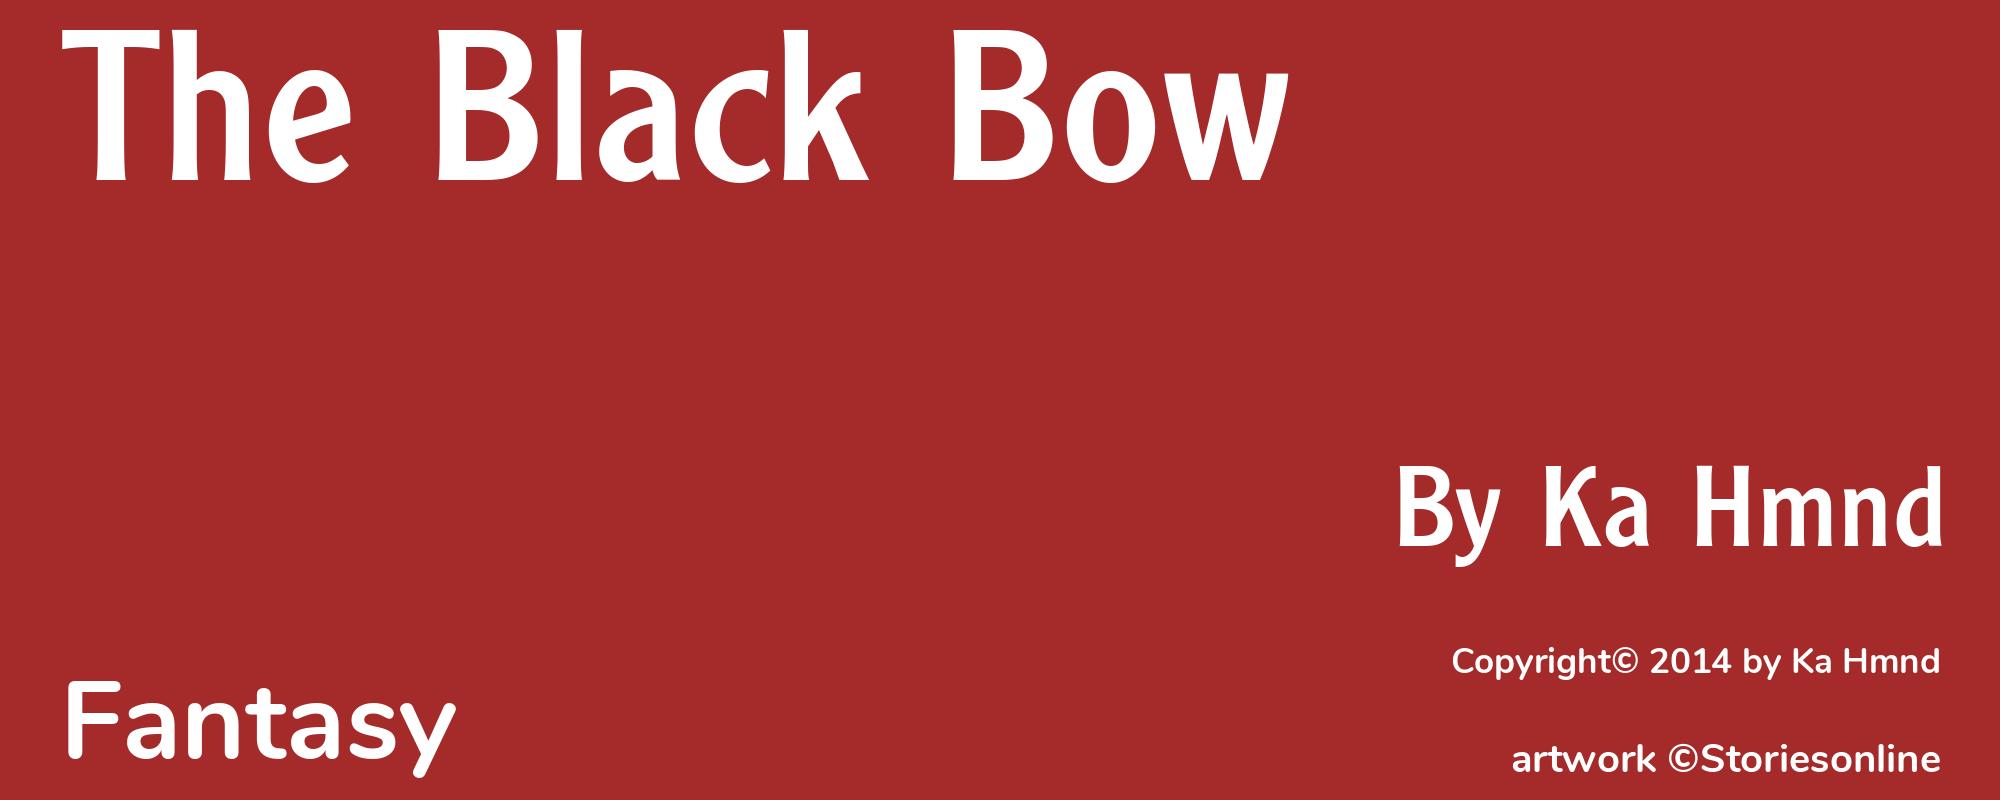 The Black Bow - Cover